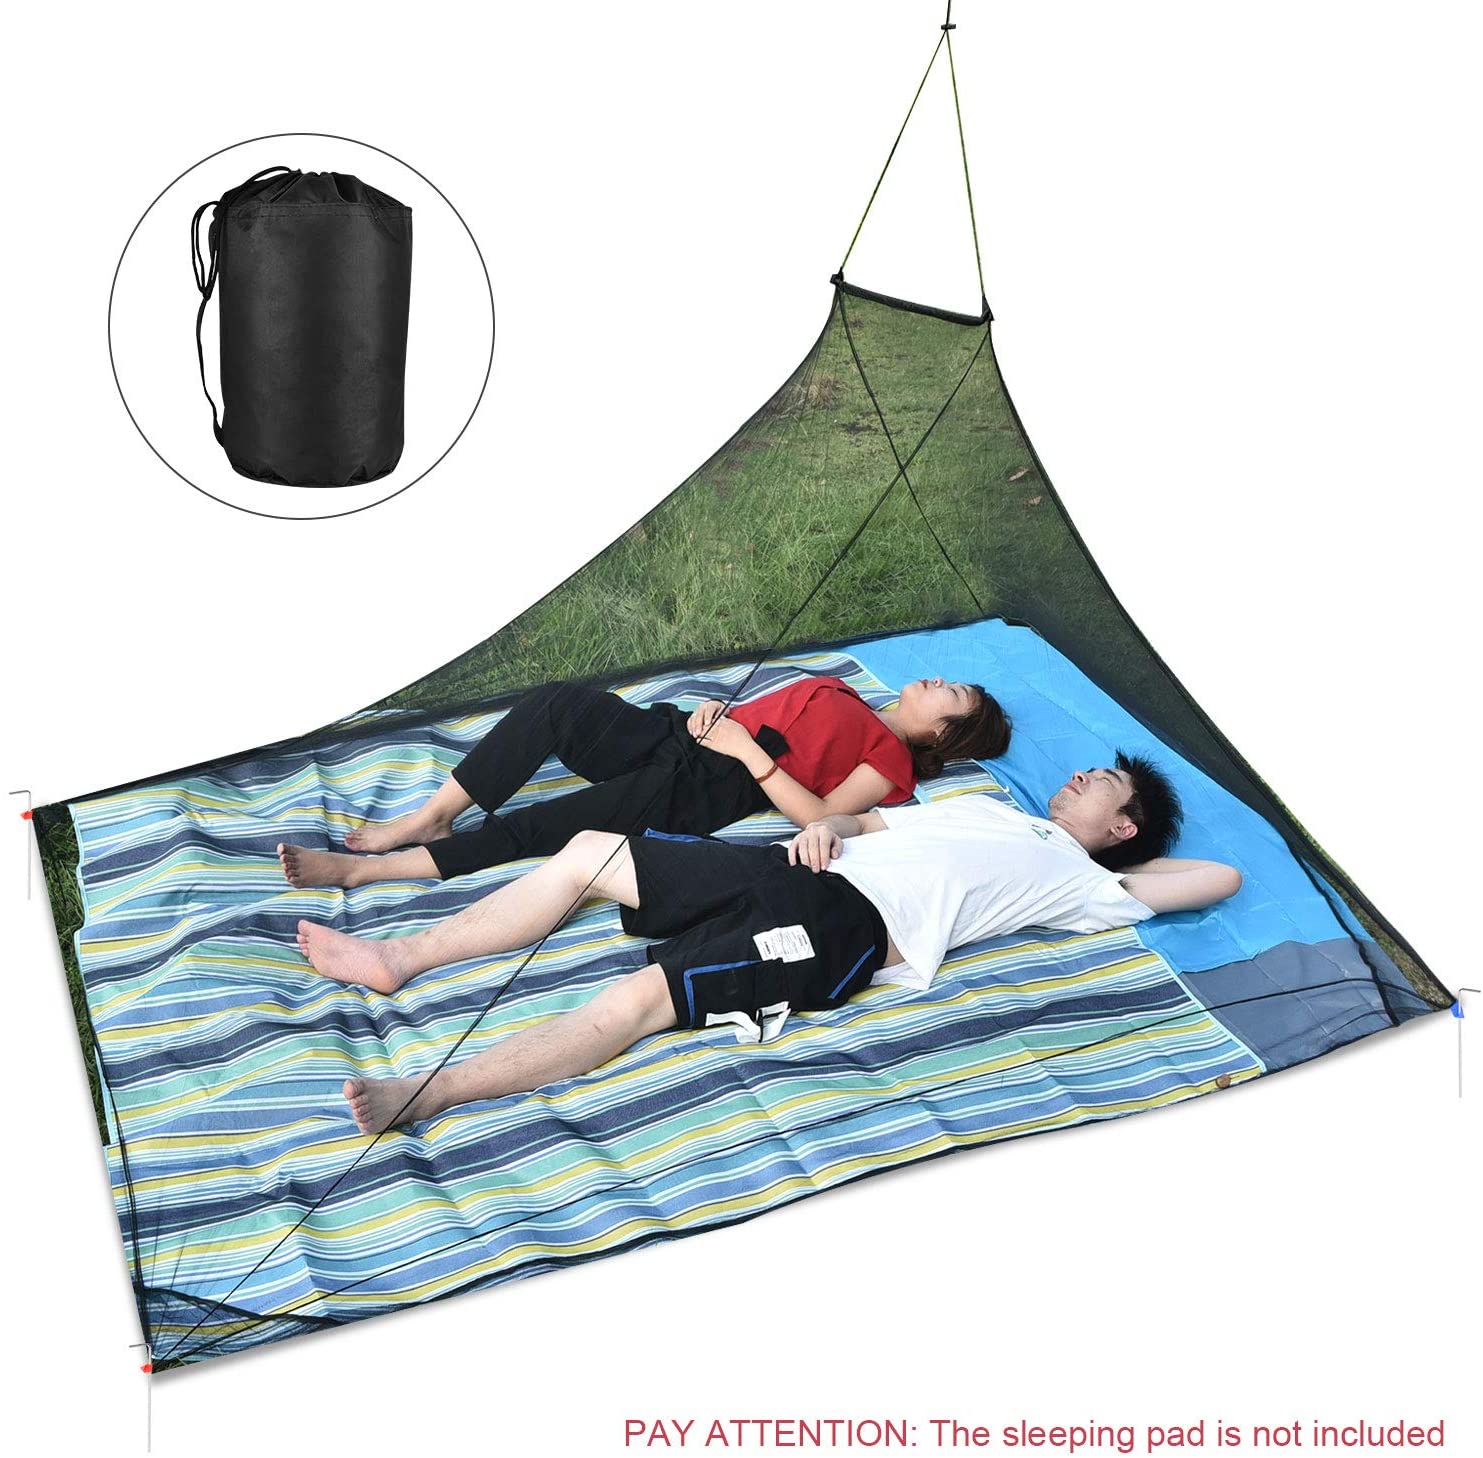 OTraki Mosquito Net for Single Person Camping Anti Mosquito Nets with Carry Bag 4 PCS Stakes Outdoor Travel Sleeping Bag Insect Netting Cover Portable Canopy Lightweight Mesh Tent Black